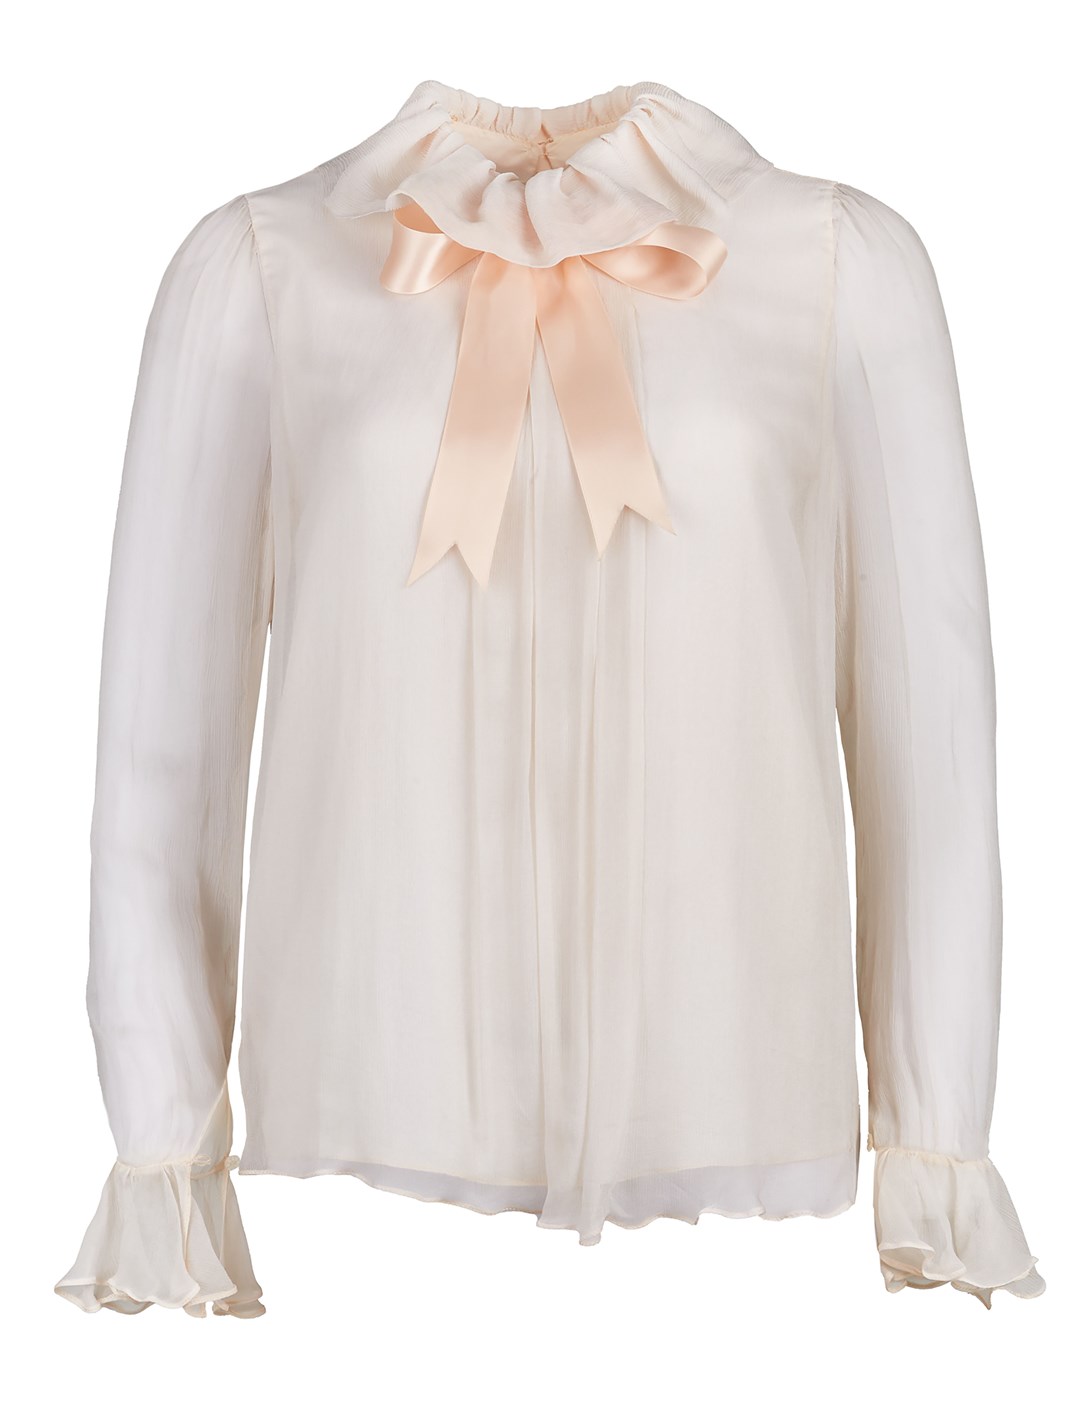 A blouse worn by Diana for her engagement portrait in 1981 was sold for four times its estimate (Julien’s Auctions/PA)